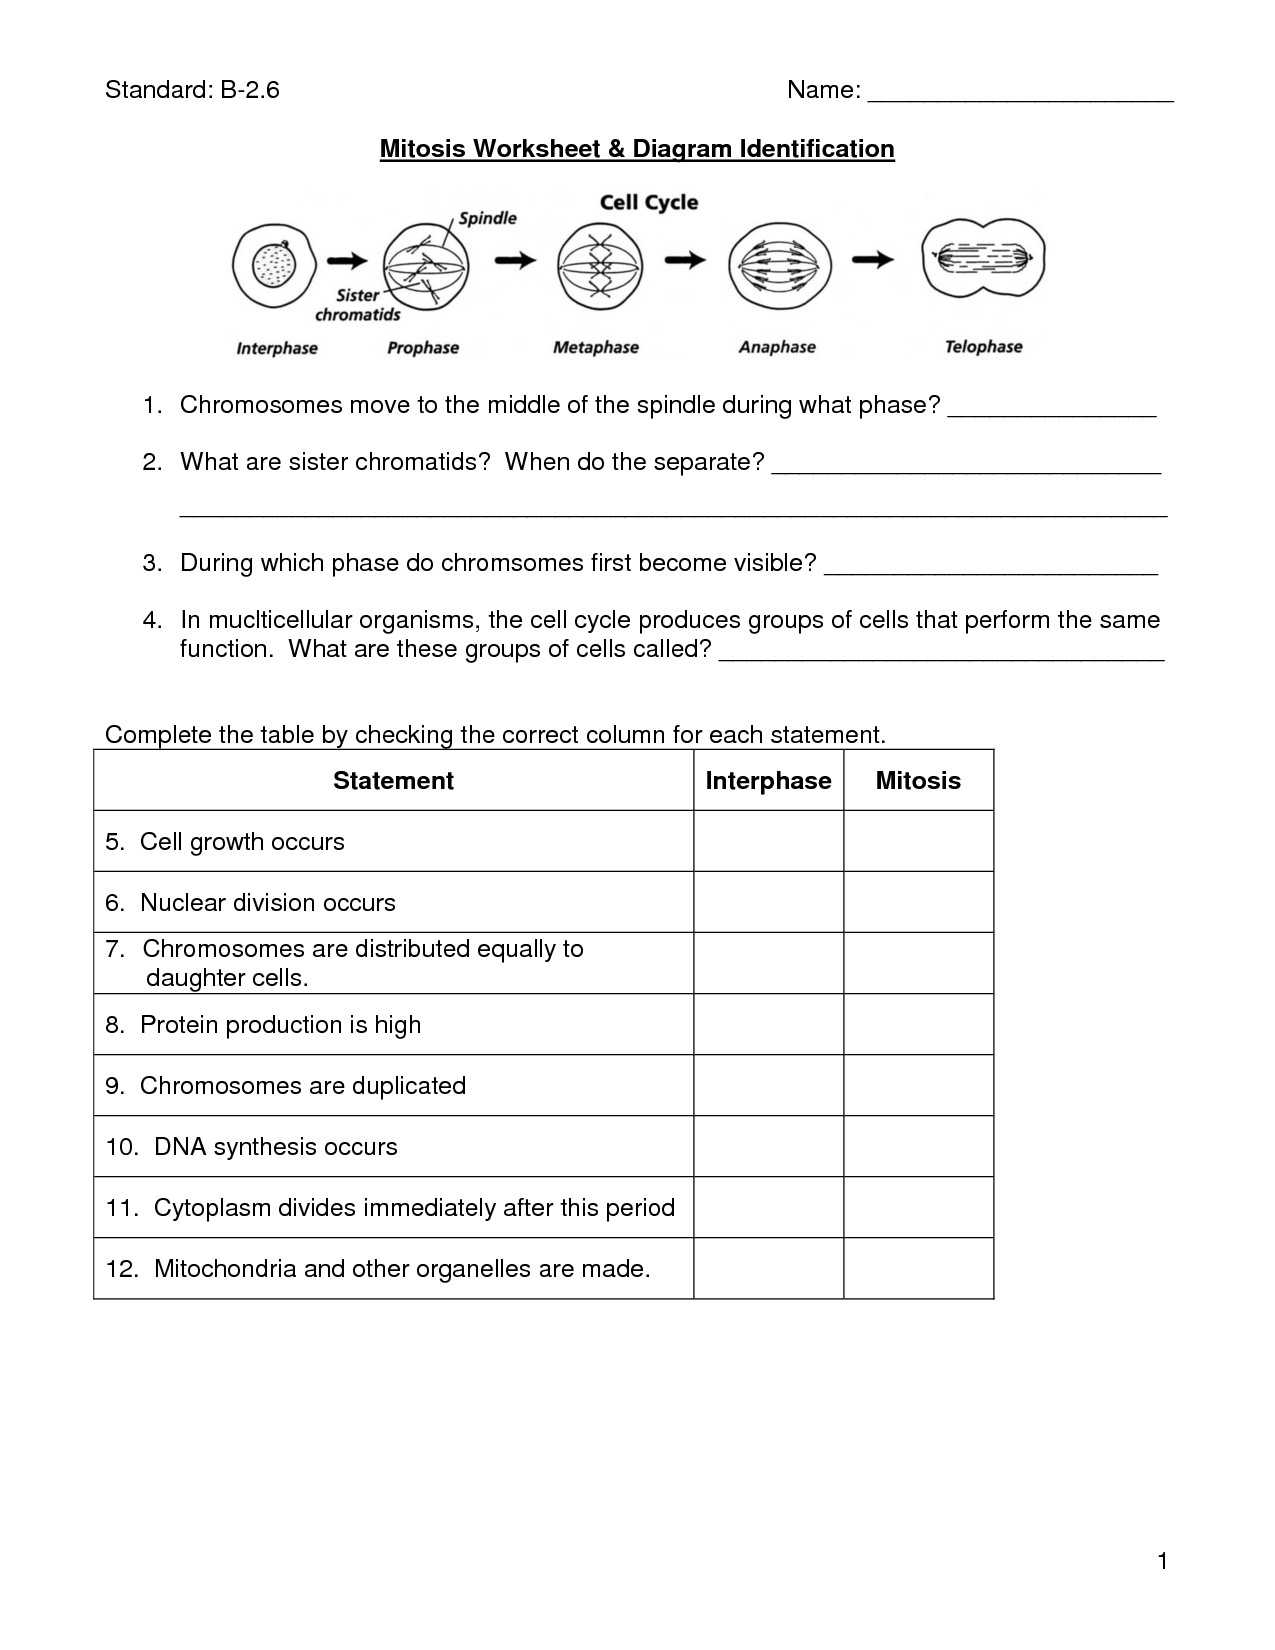 Evolution by Natural Selection Worksheet with Cladogram Worksheet Answer Key Luxury 30 Best Evolution and Natural